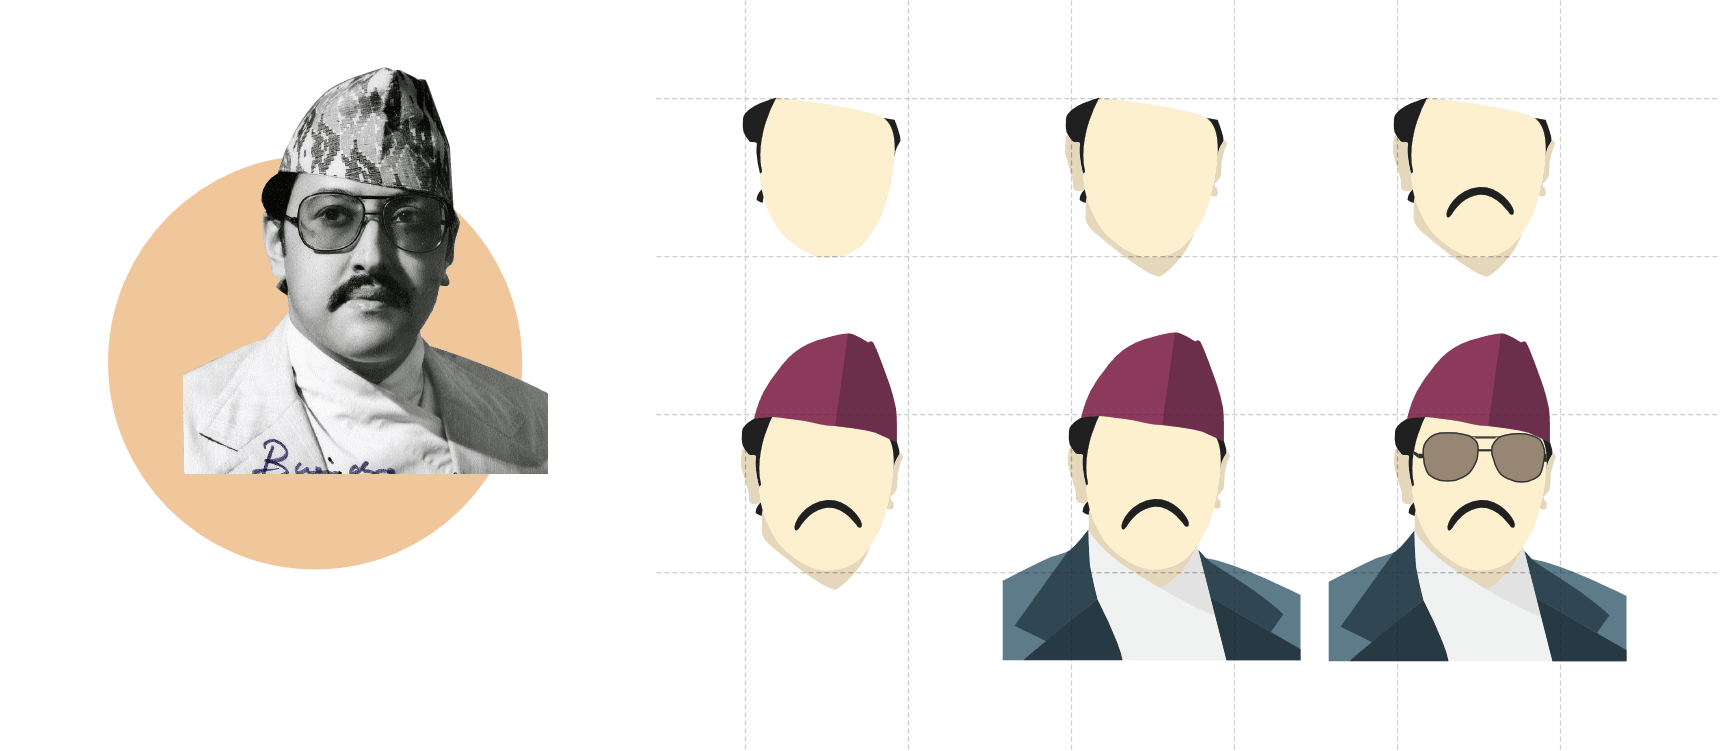 Development stages of the portrait